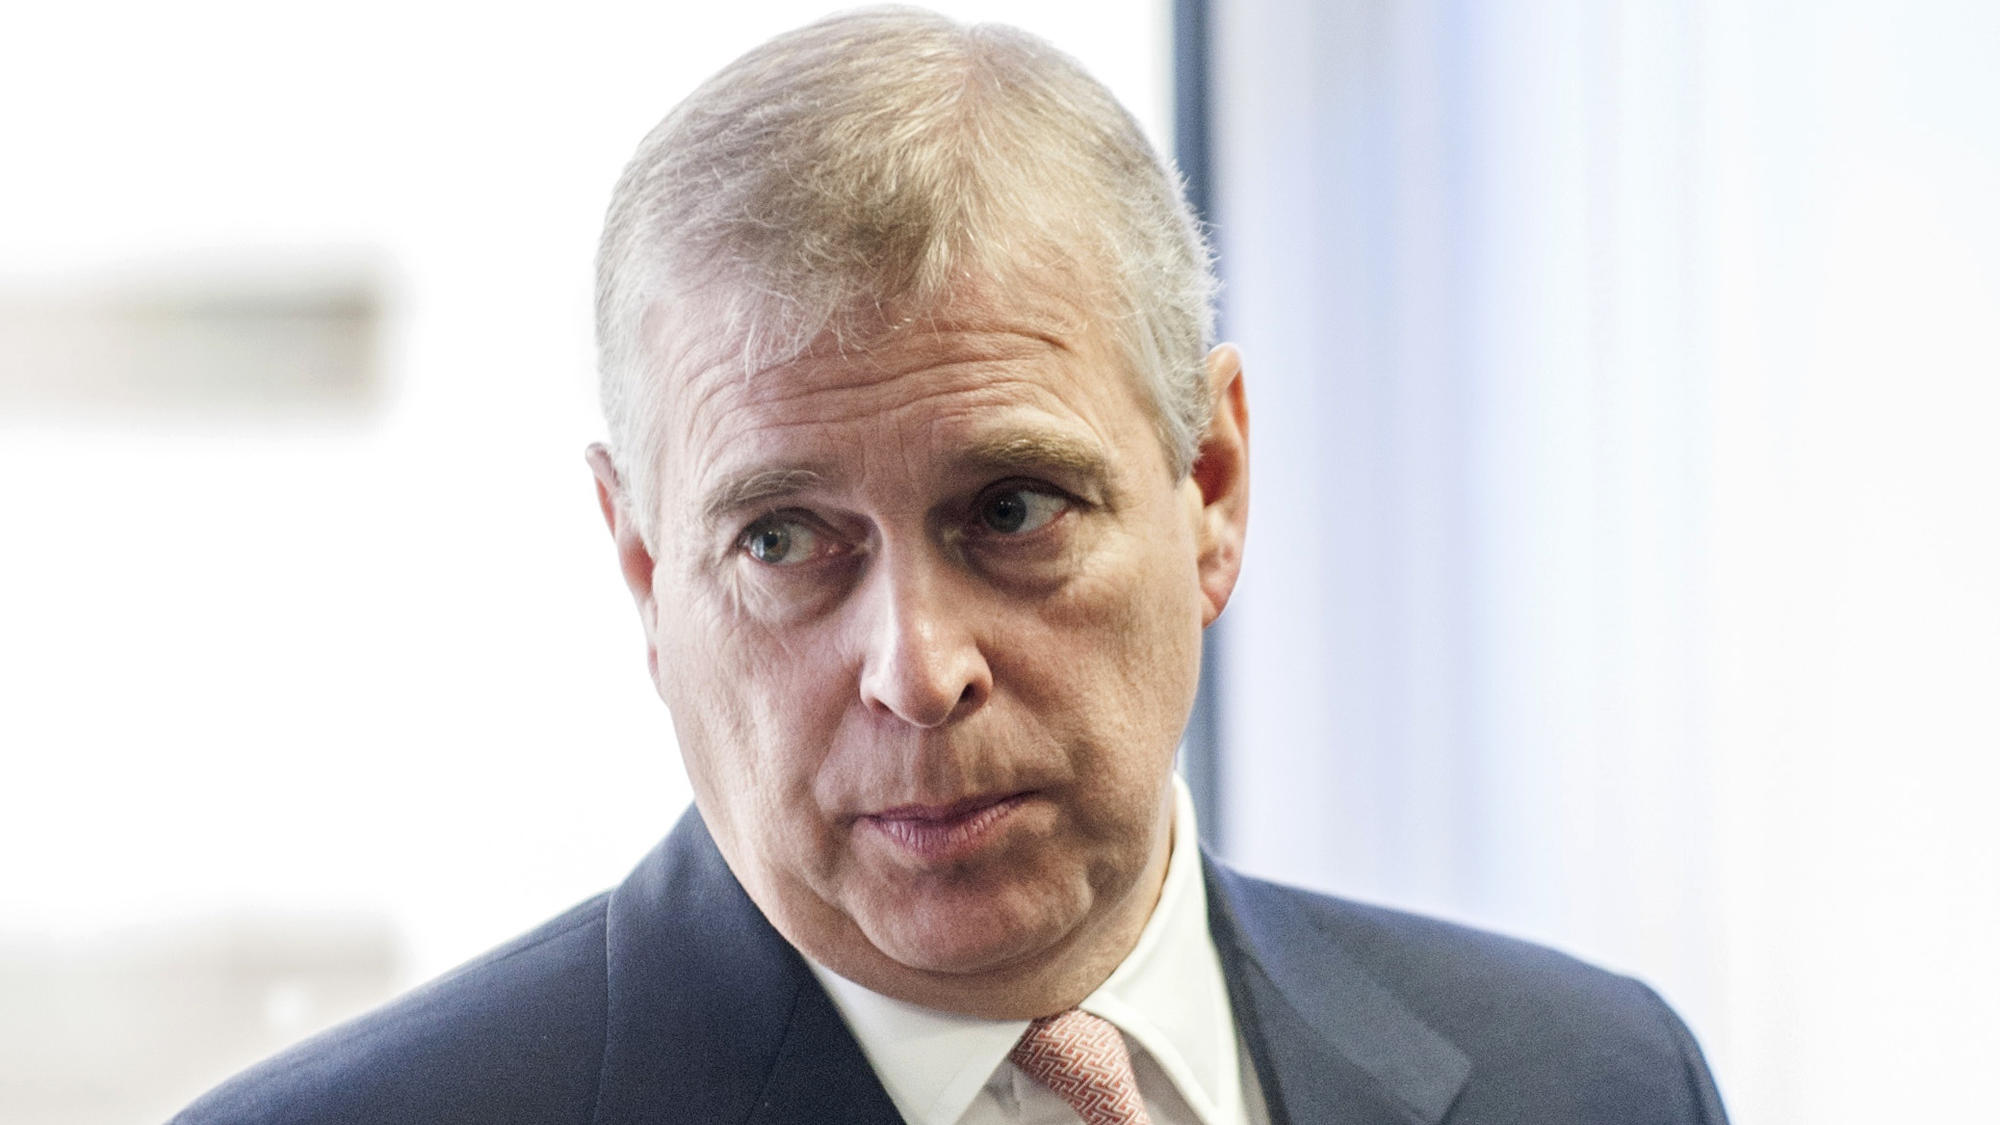 Prince Andrew is stepping away from public duties 